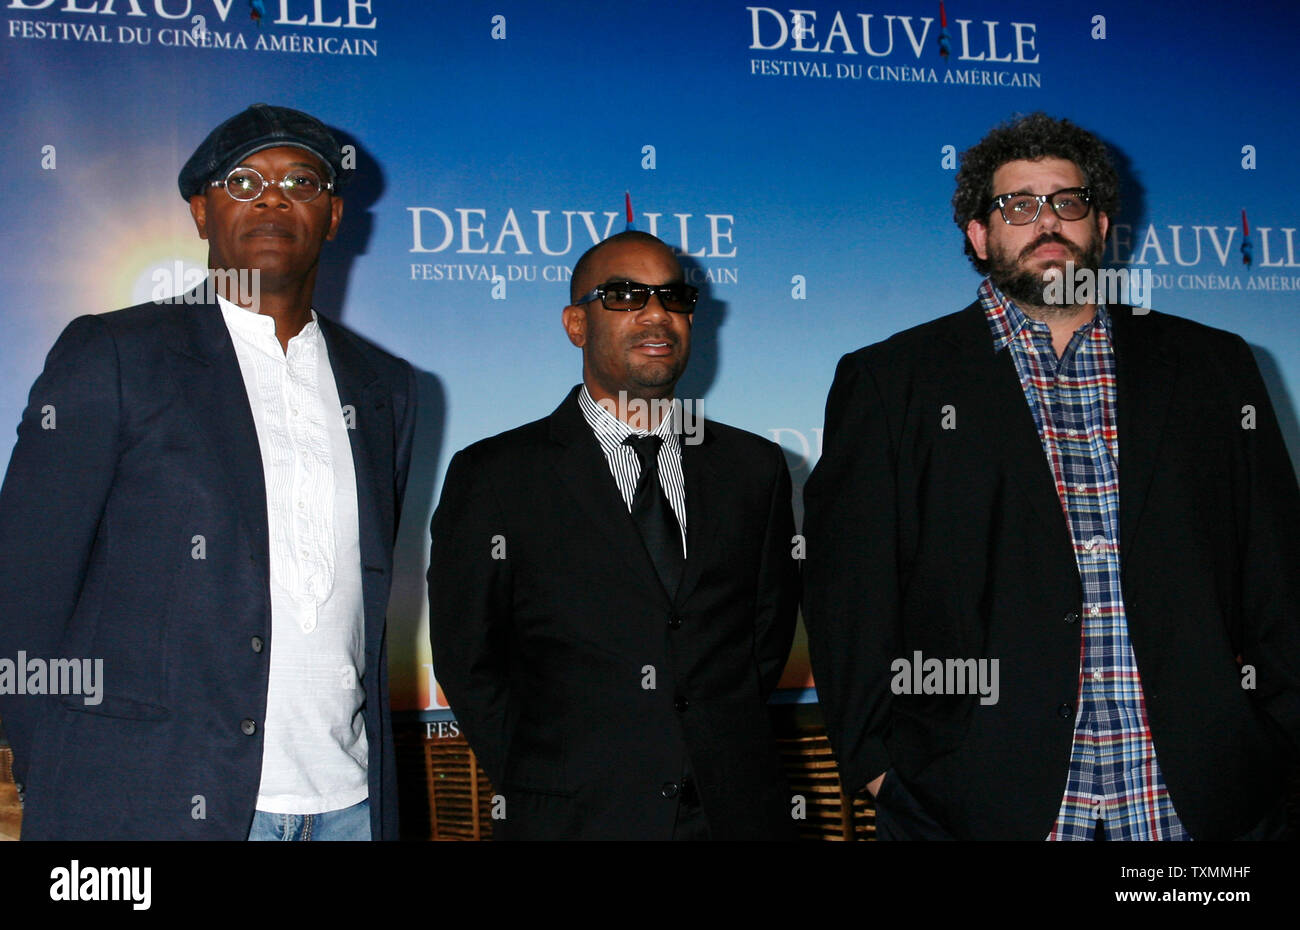 Actor Samuel Jackson (L), producer James Lassiter (C) and director Neil LaBute arrive at a photocall for the film 'Lakeview Terrace' during the 34th American Film Festival of Deauville in Deauville, France on September 7, 2008.    (UPI Photo/David Silpa) Stock Photo